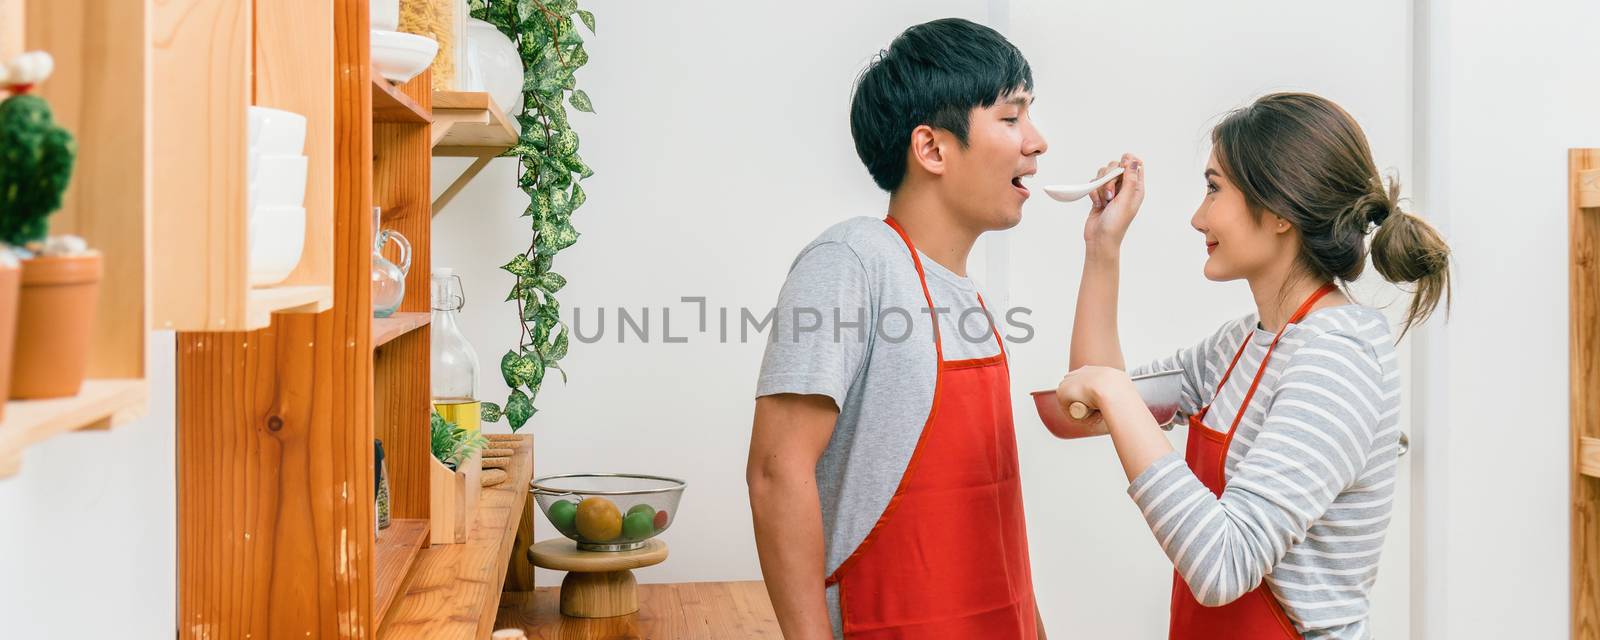 Banner and cover scene of Happy Asian Lover or couple cooking in happiness action in the kitchen room at the modern house, Couple and life style, kitchen and food concept.